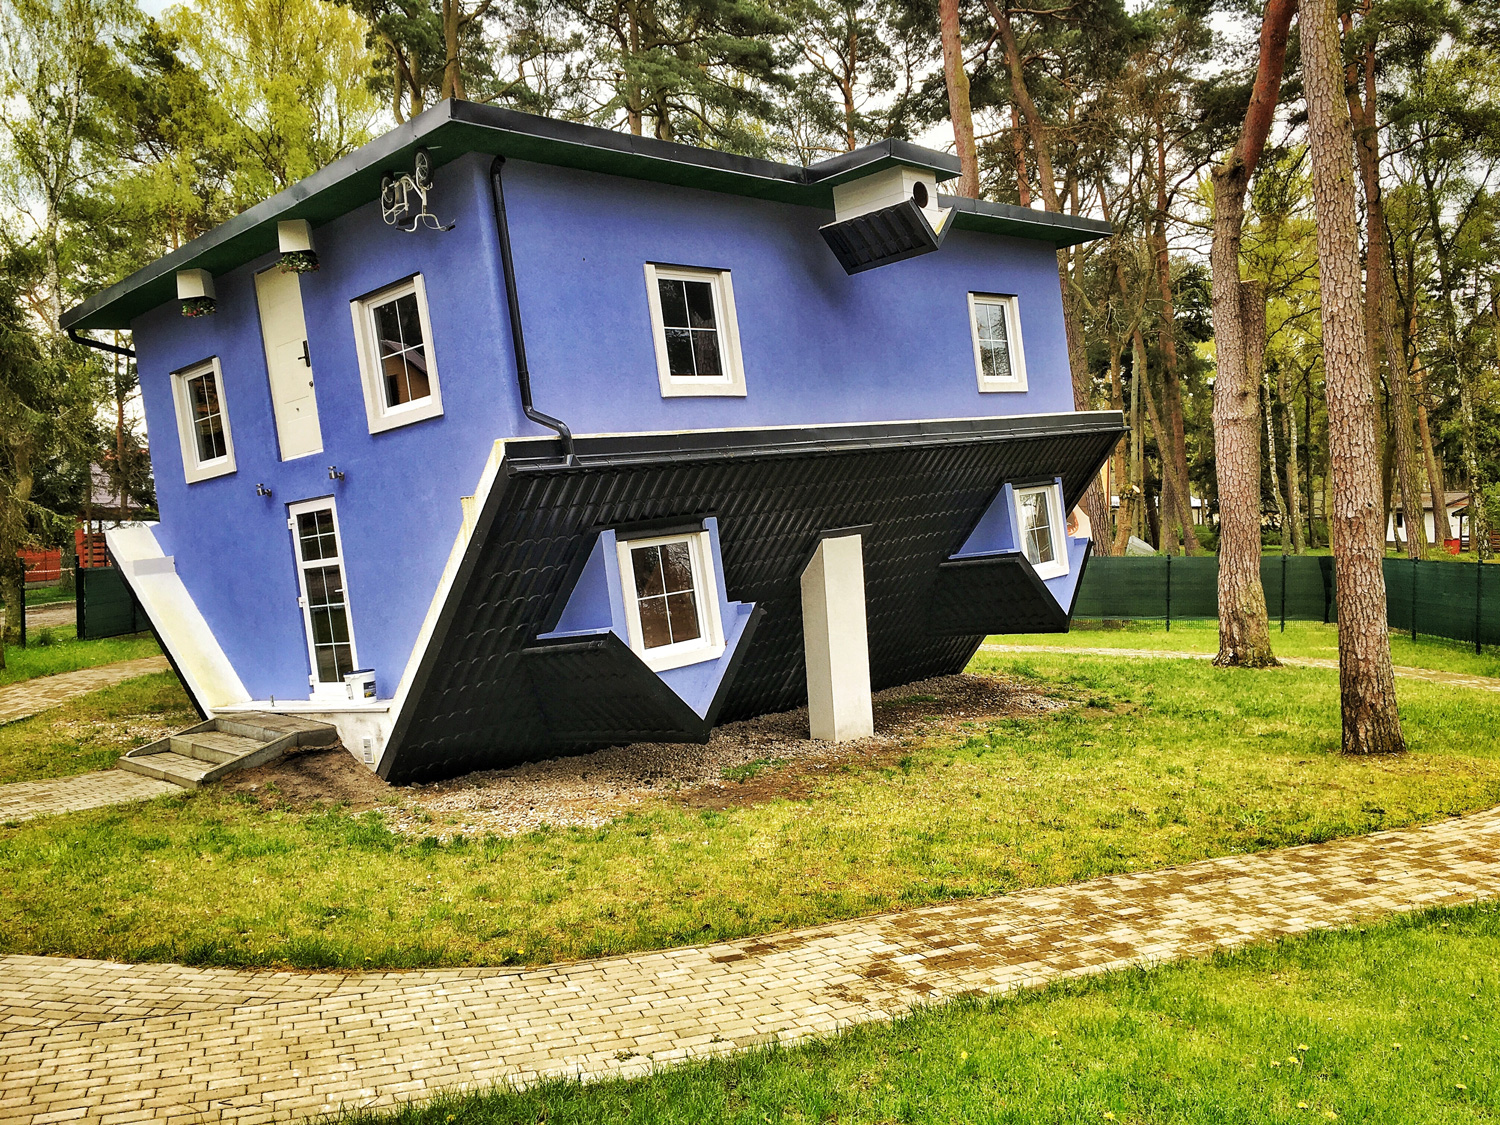 Unusual Home Designs That Will Amaze You